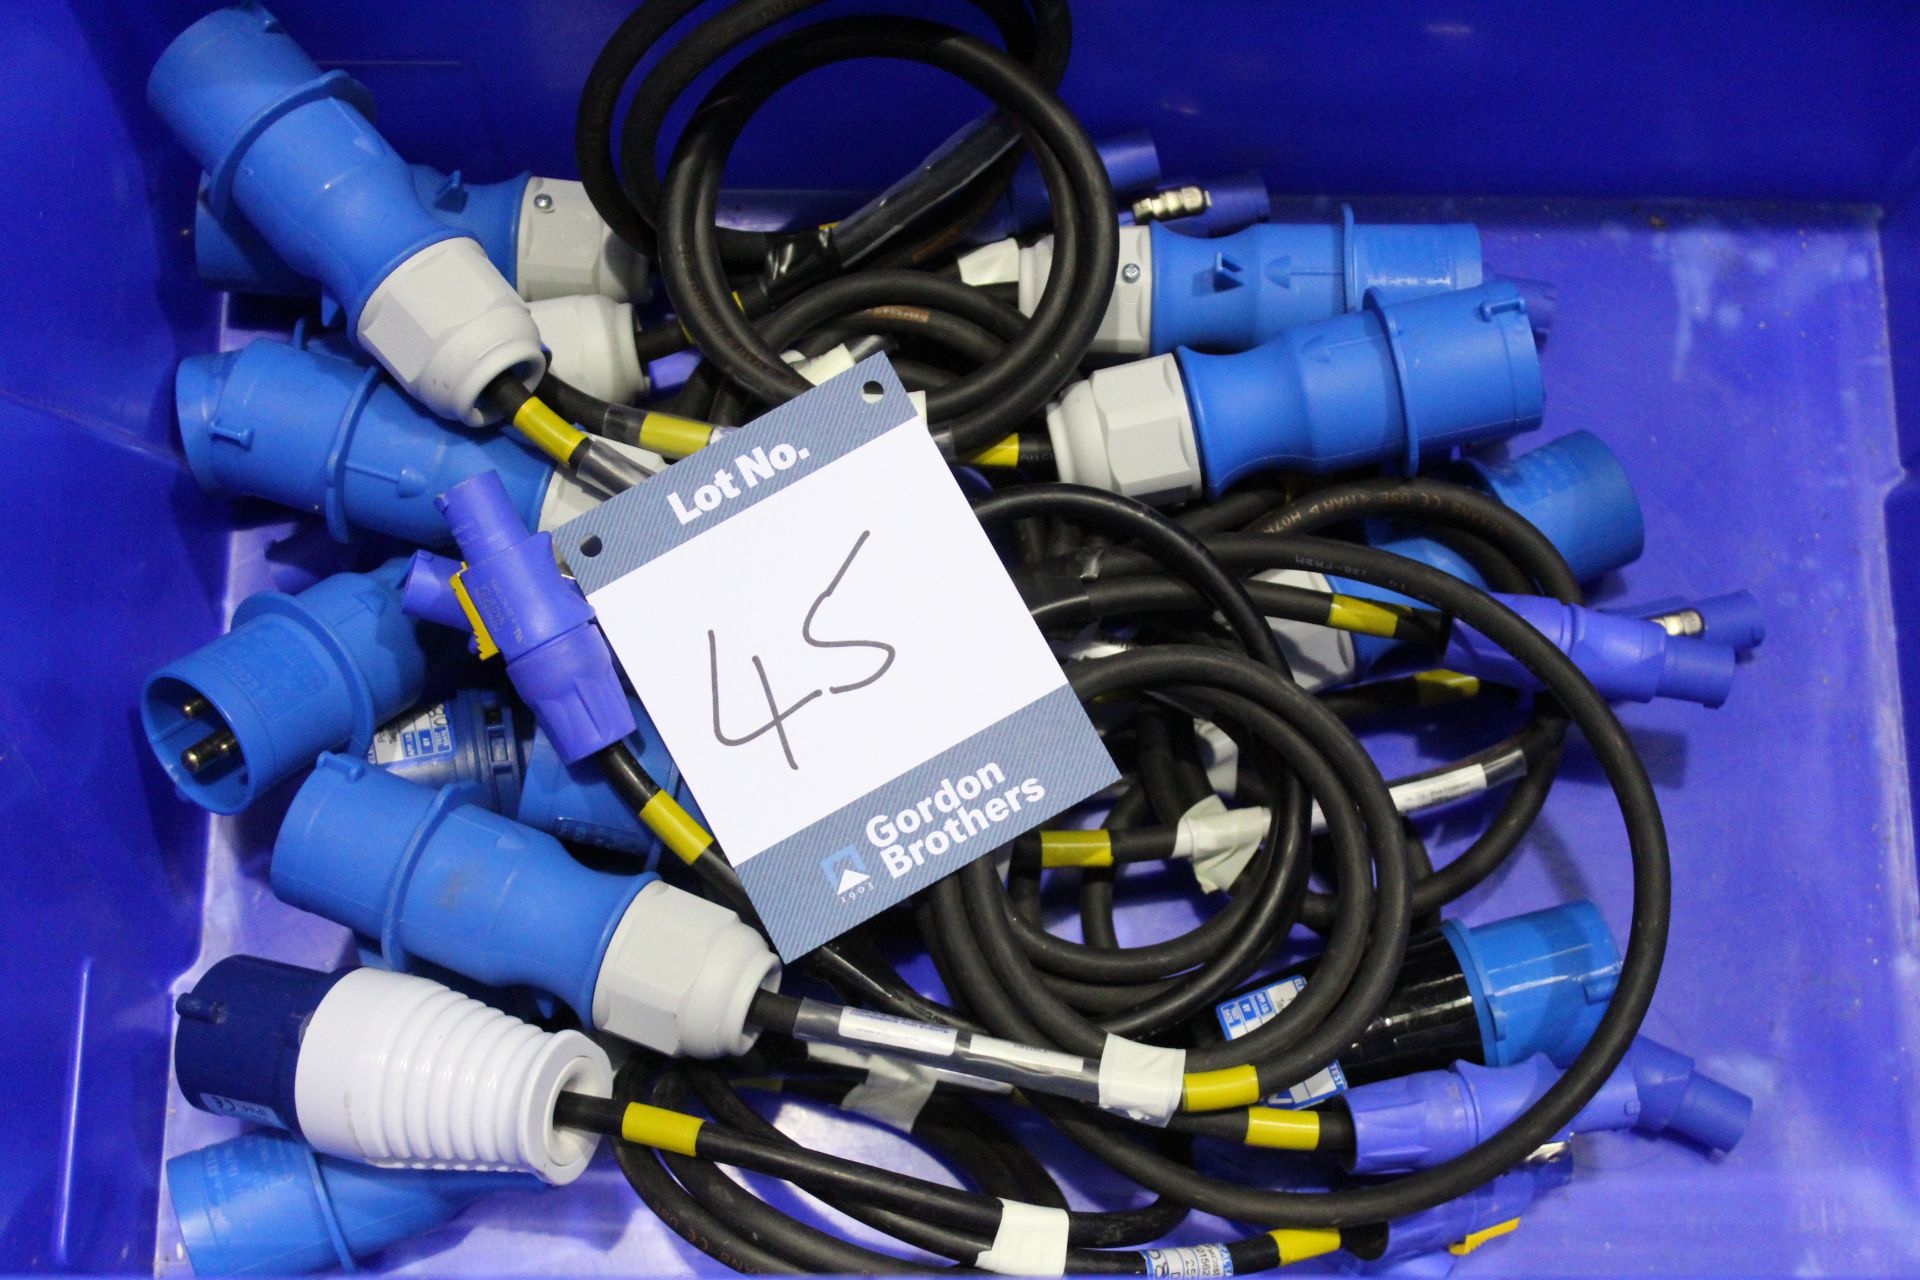 Approx. 15x 1m 16a - Blue PowerCON cables in 600mm x 400mm plastic tote bin used for P2.6 LED